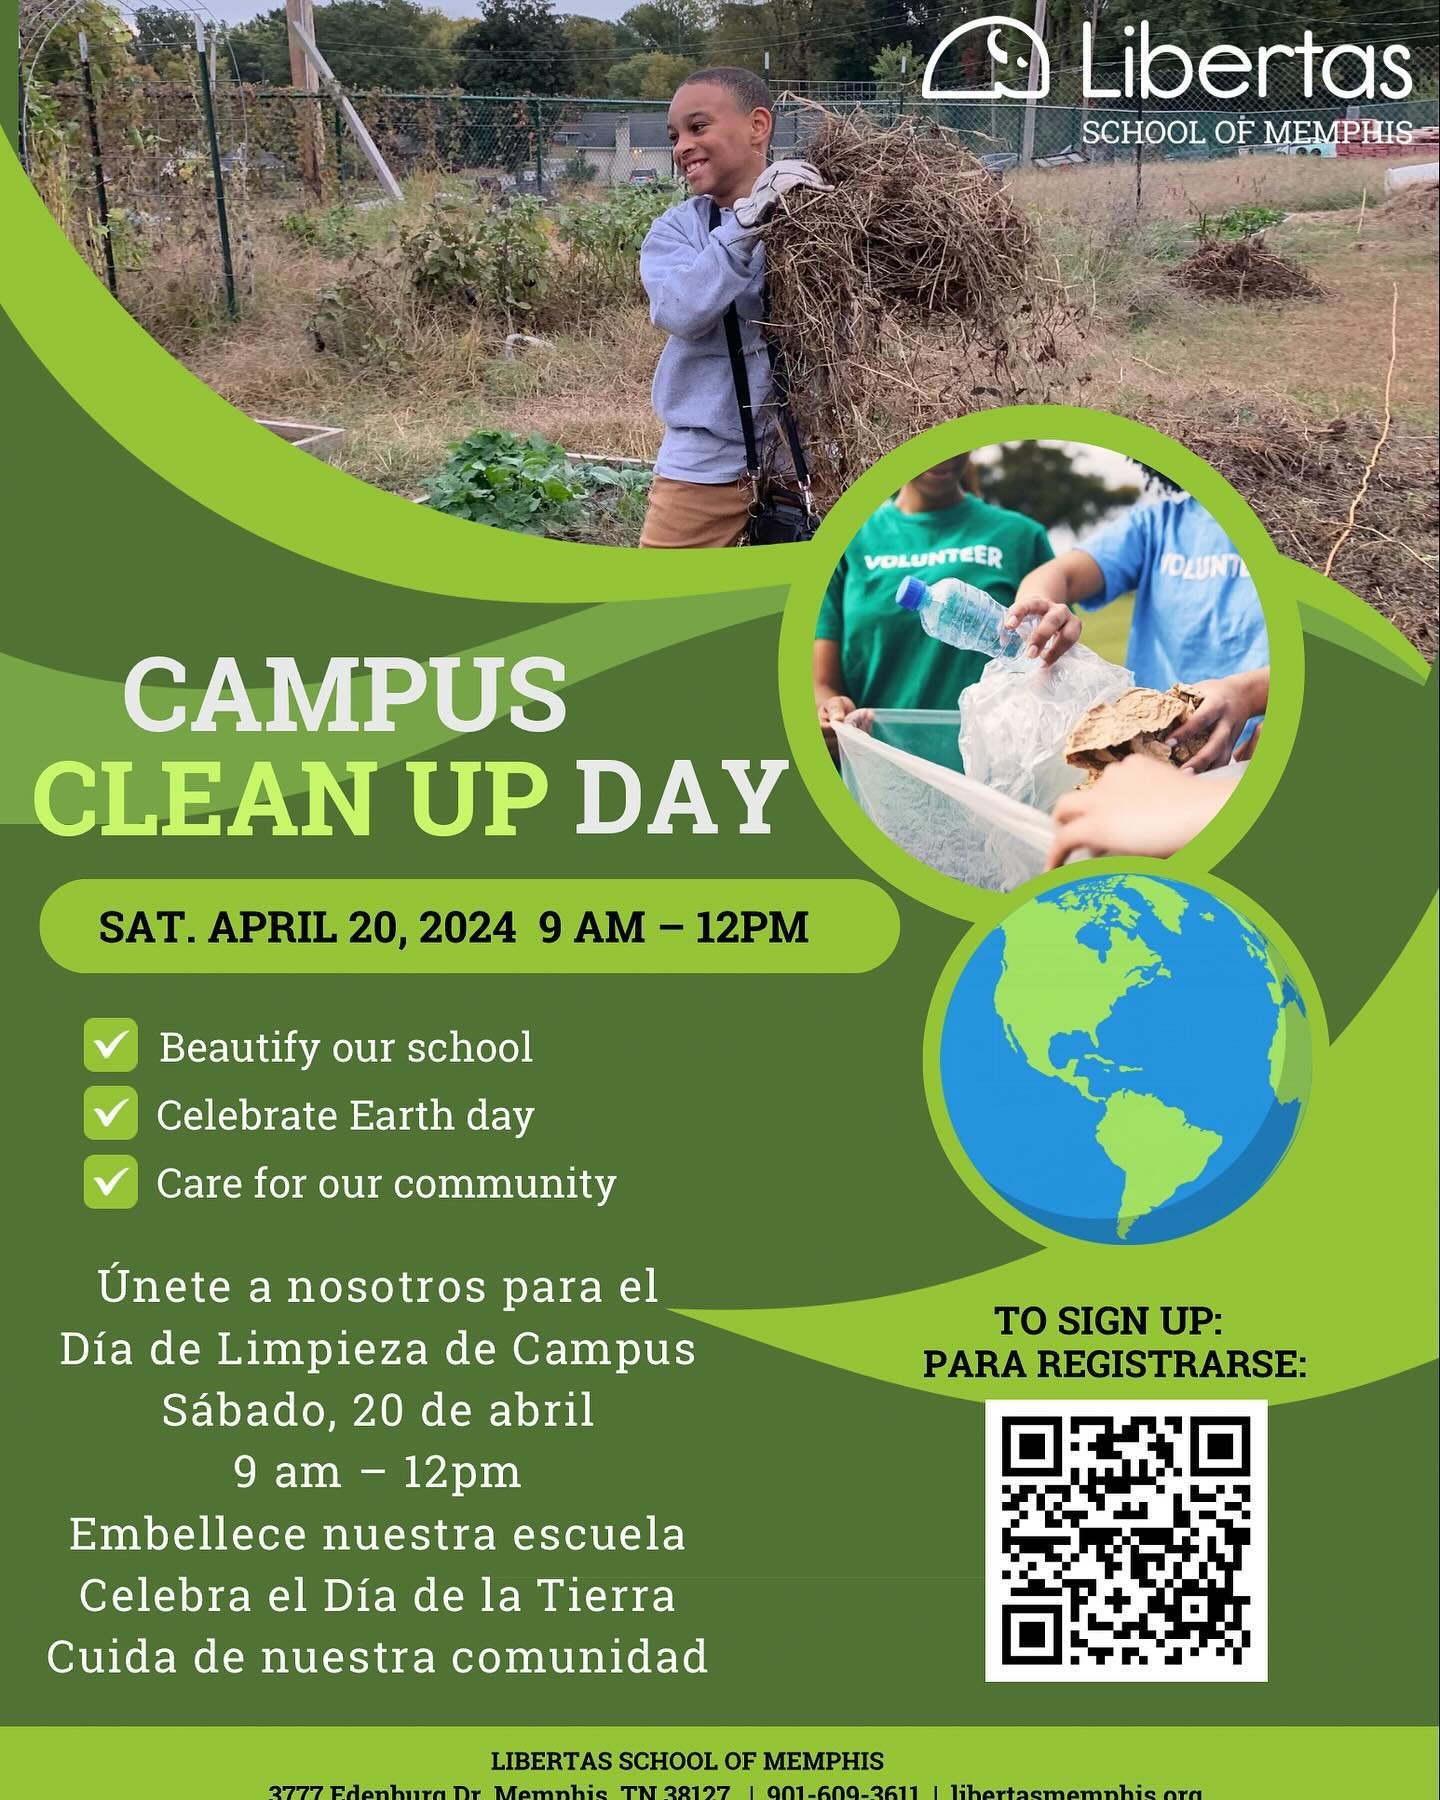 We have 3 events coming up for the month of April. 

Campus cleanup-April 20th 
Early Childhood Workshop-April 23rd 
Parenting Partners: Summer Resources- April 25th 

See flyers for more information.